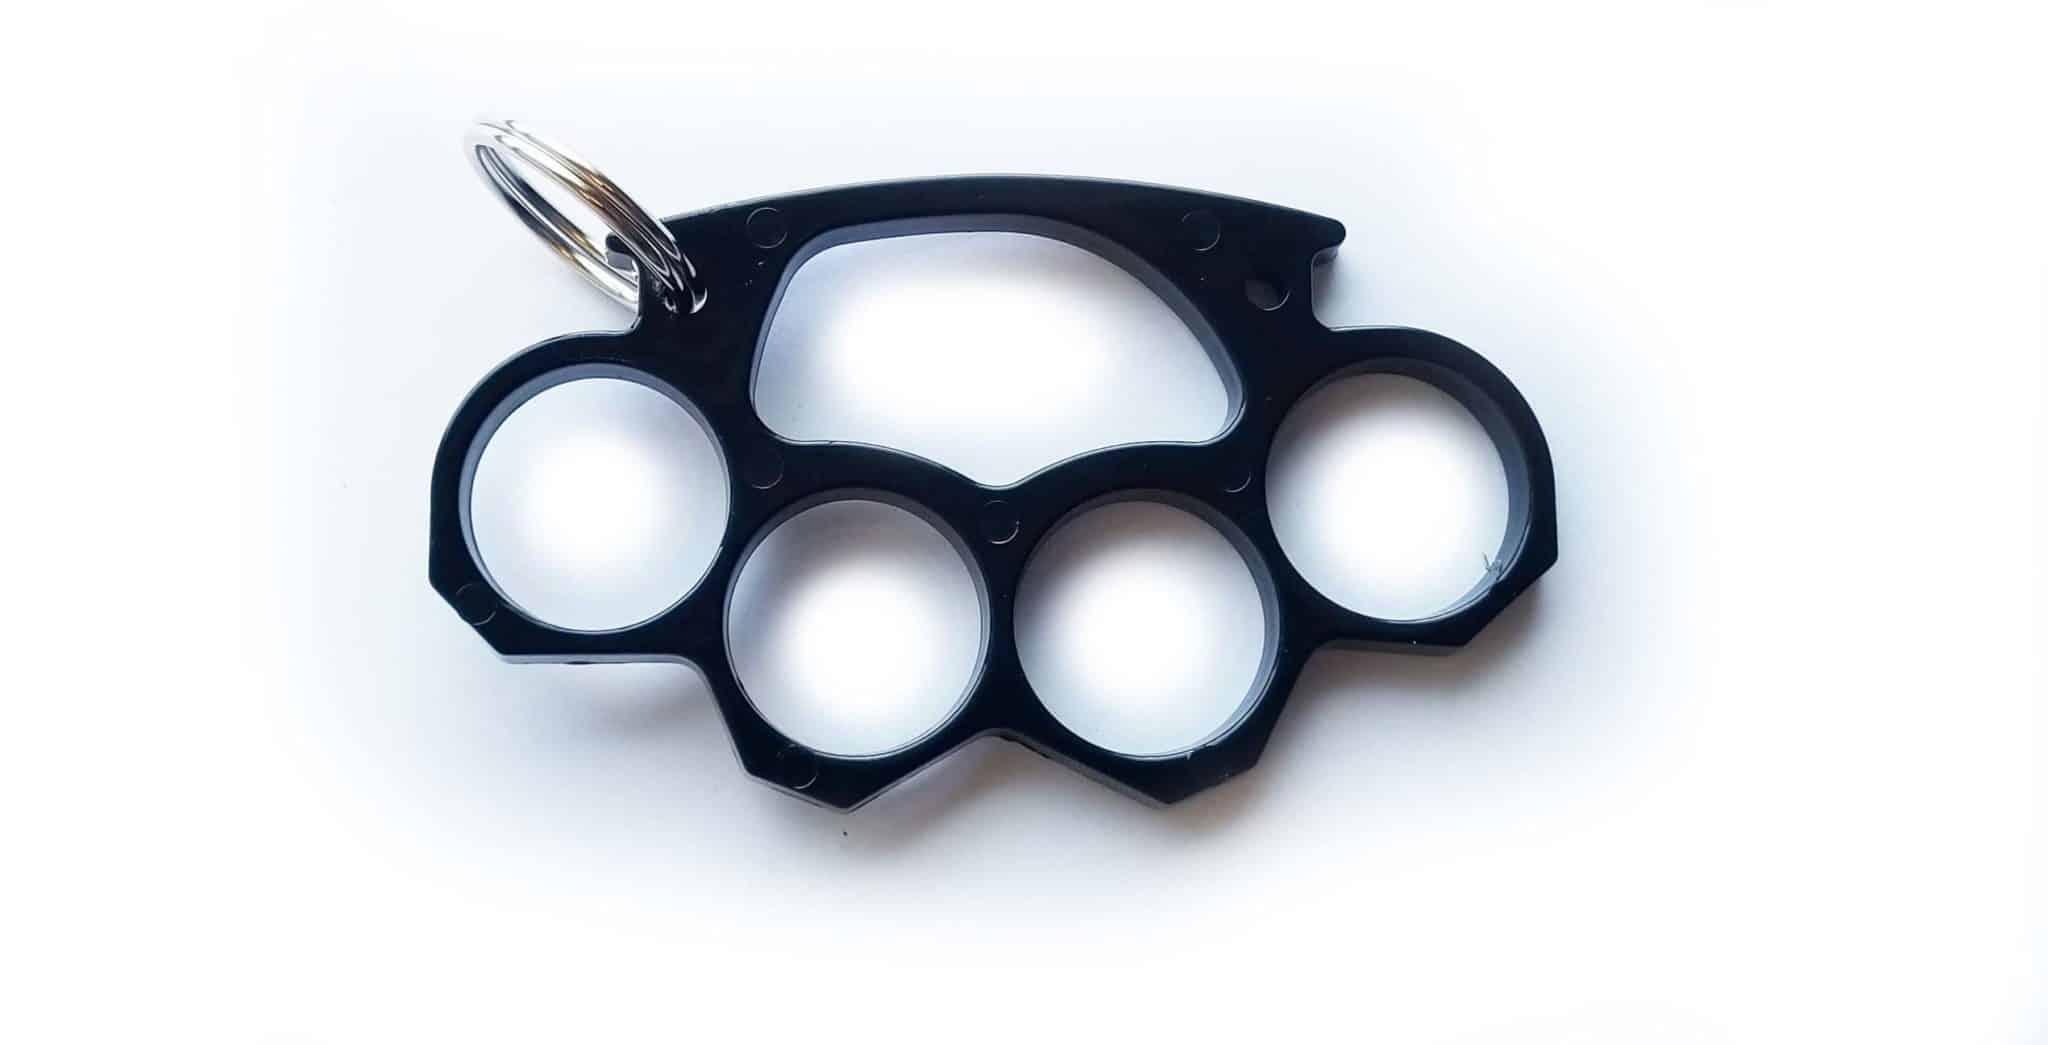 Real Brass Knuckles -  Canada